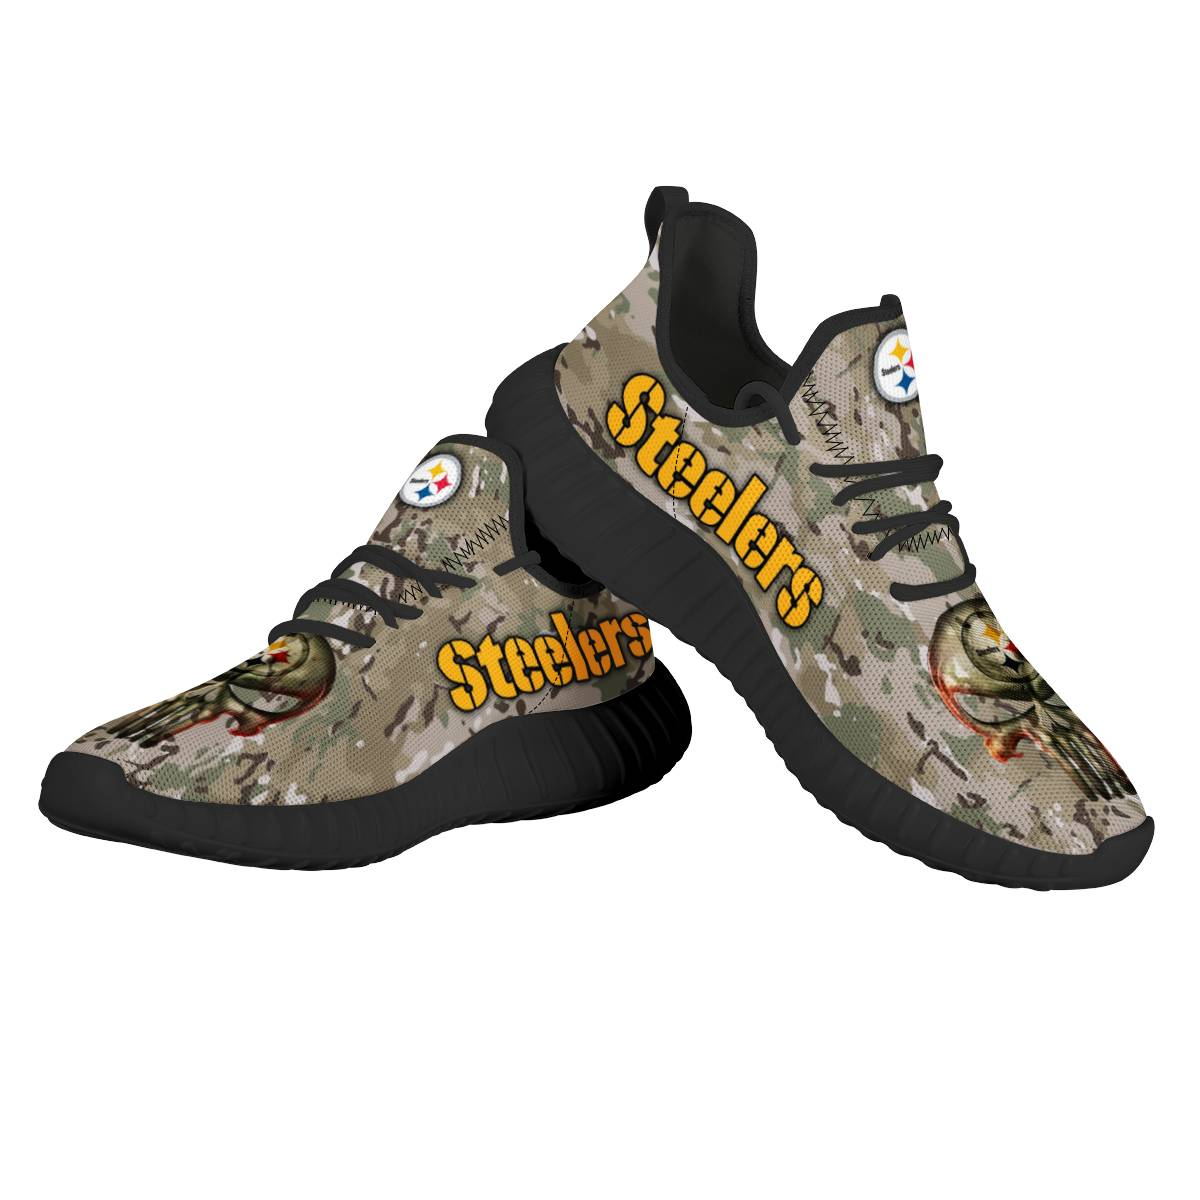 Men's Pittsburgh Steelers Mesh Knit Sneakers/Shoes 011